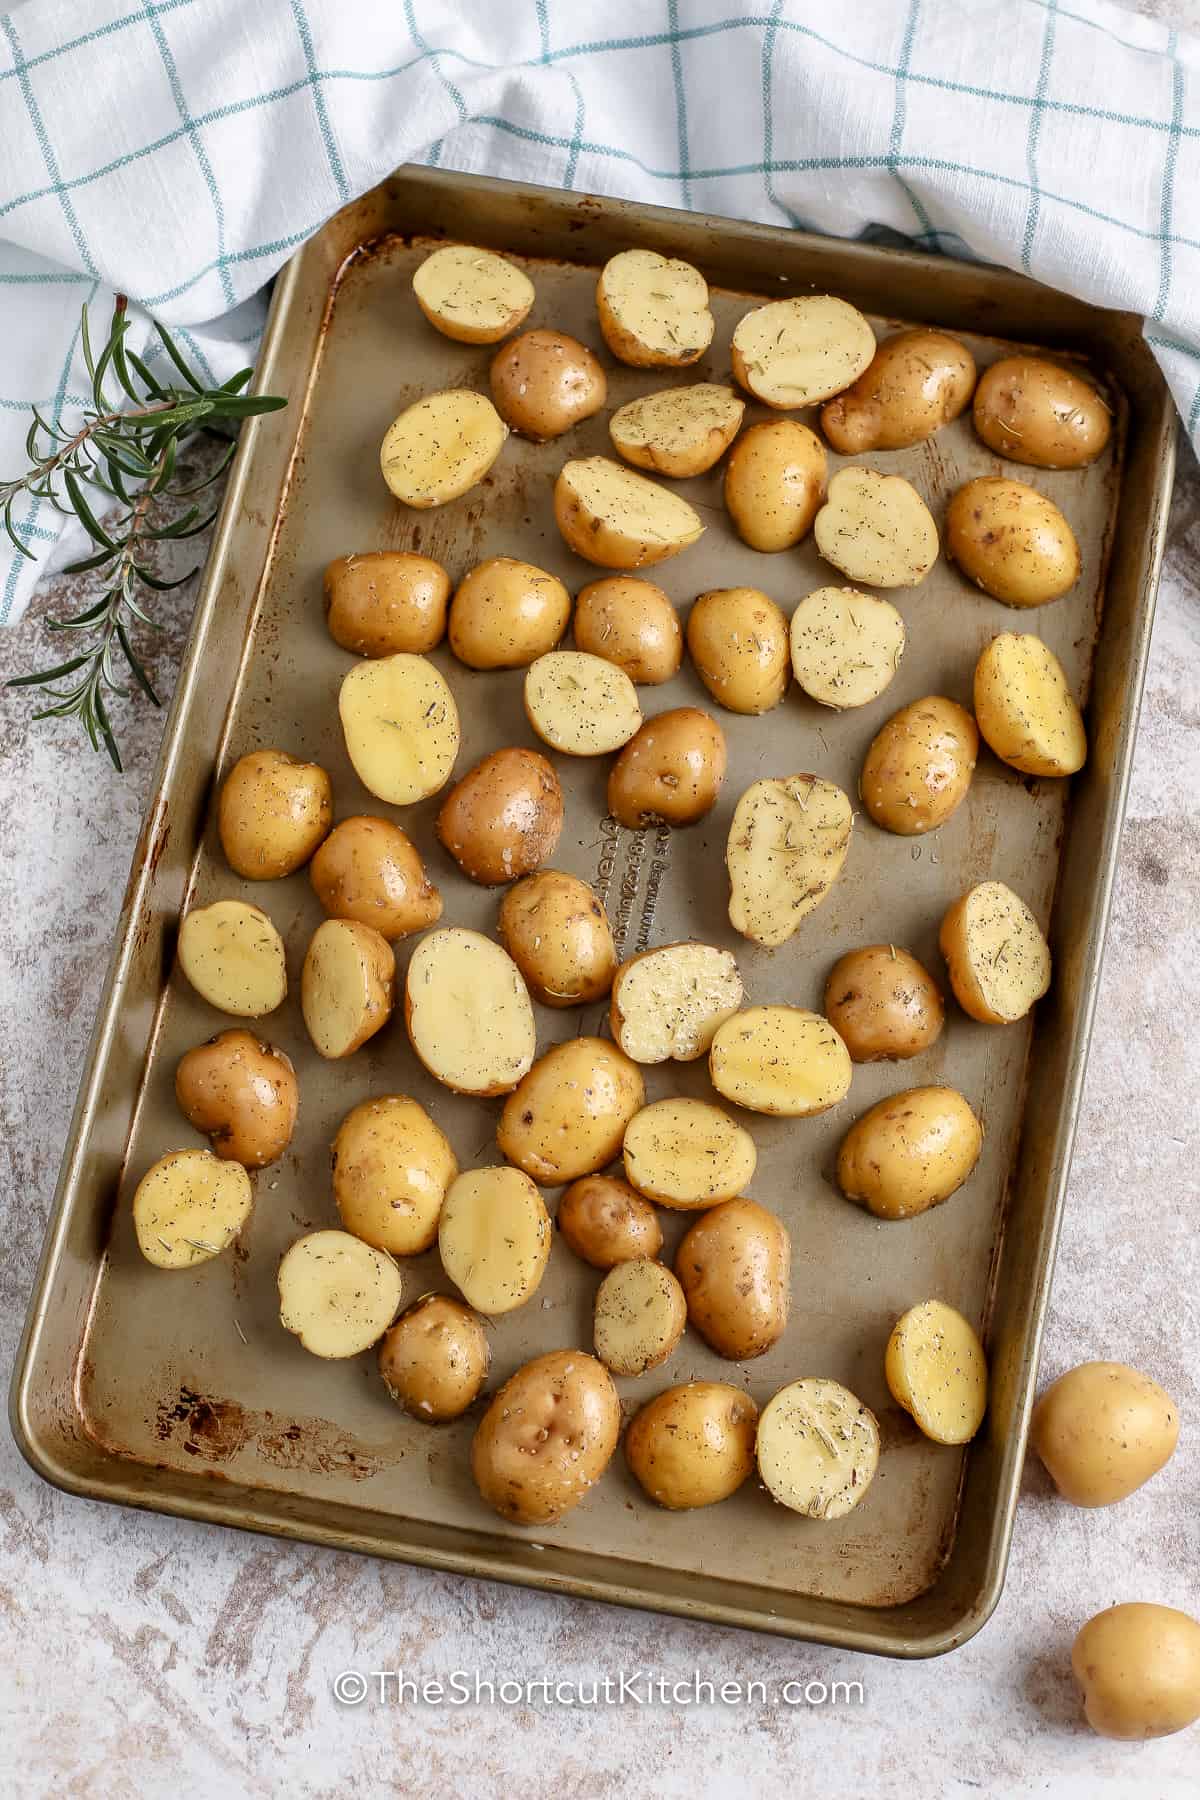 Rosemary Roasted Potatoes on a baking sheet before cooking